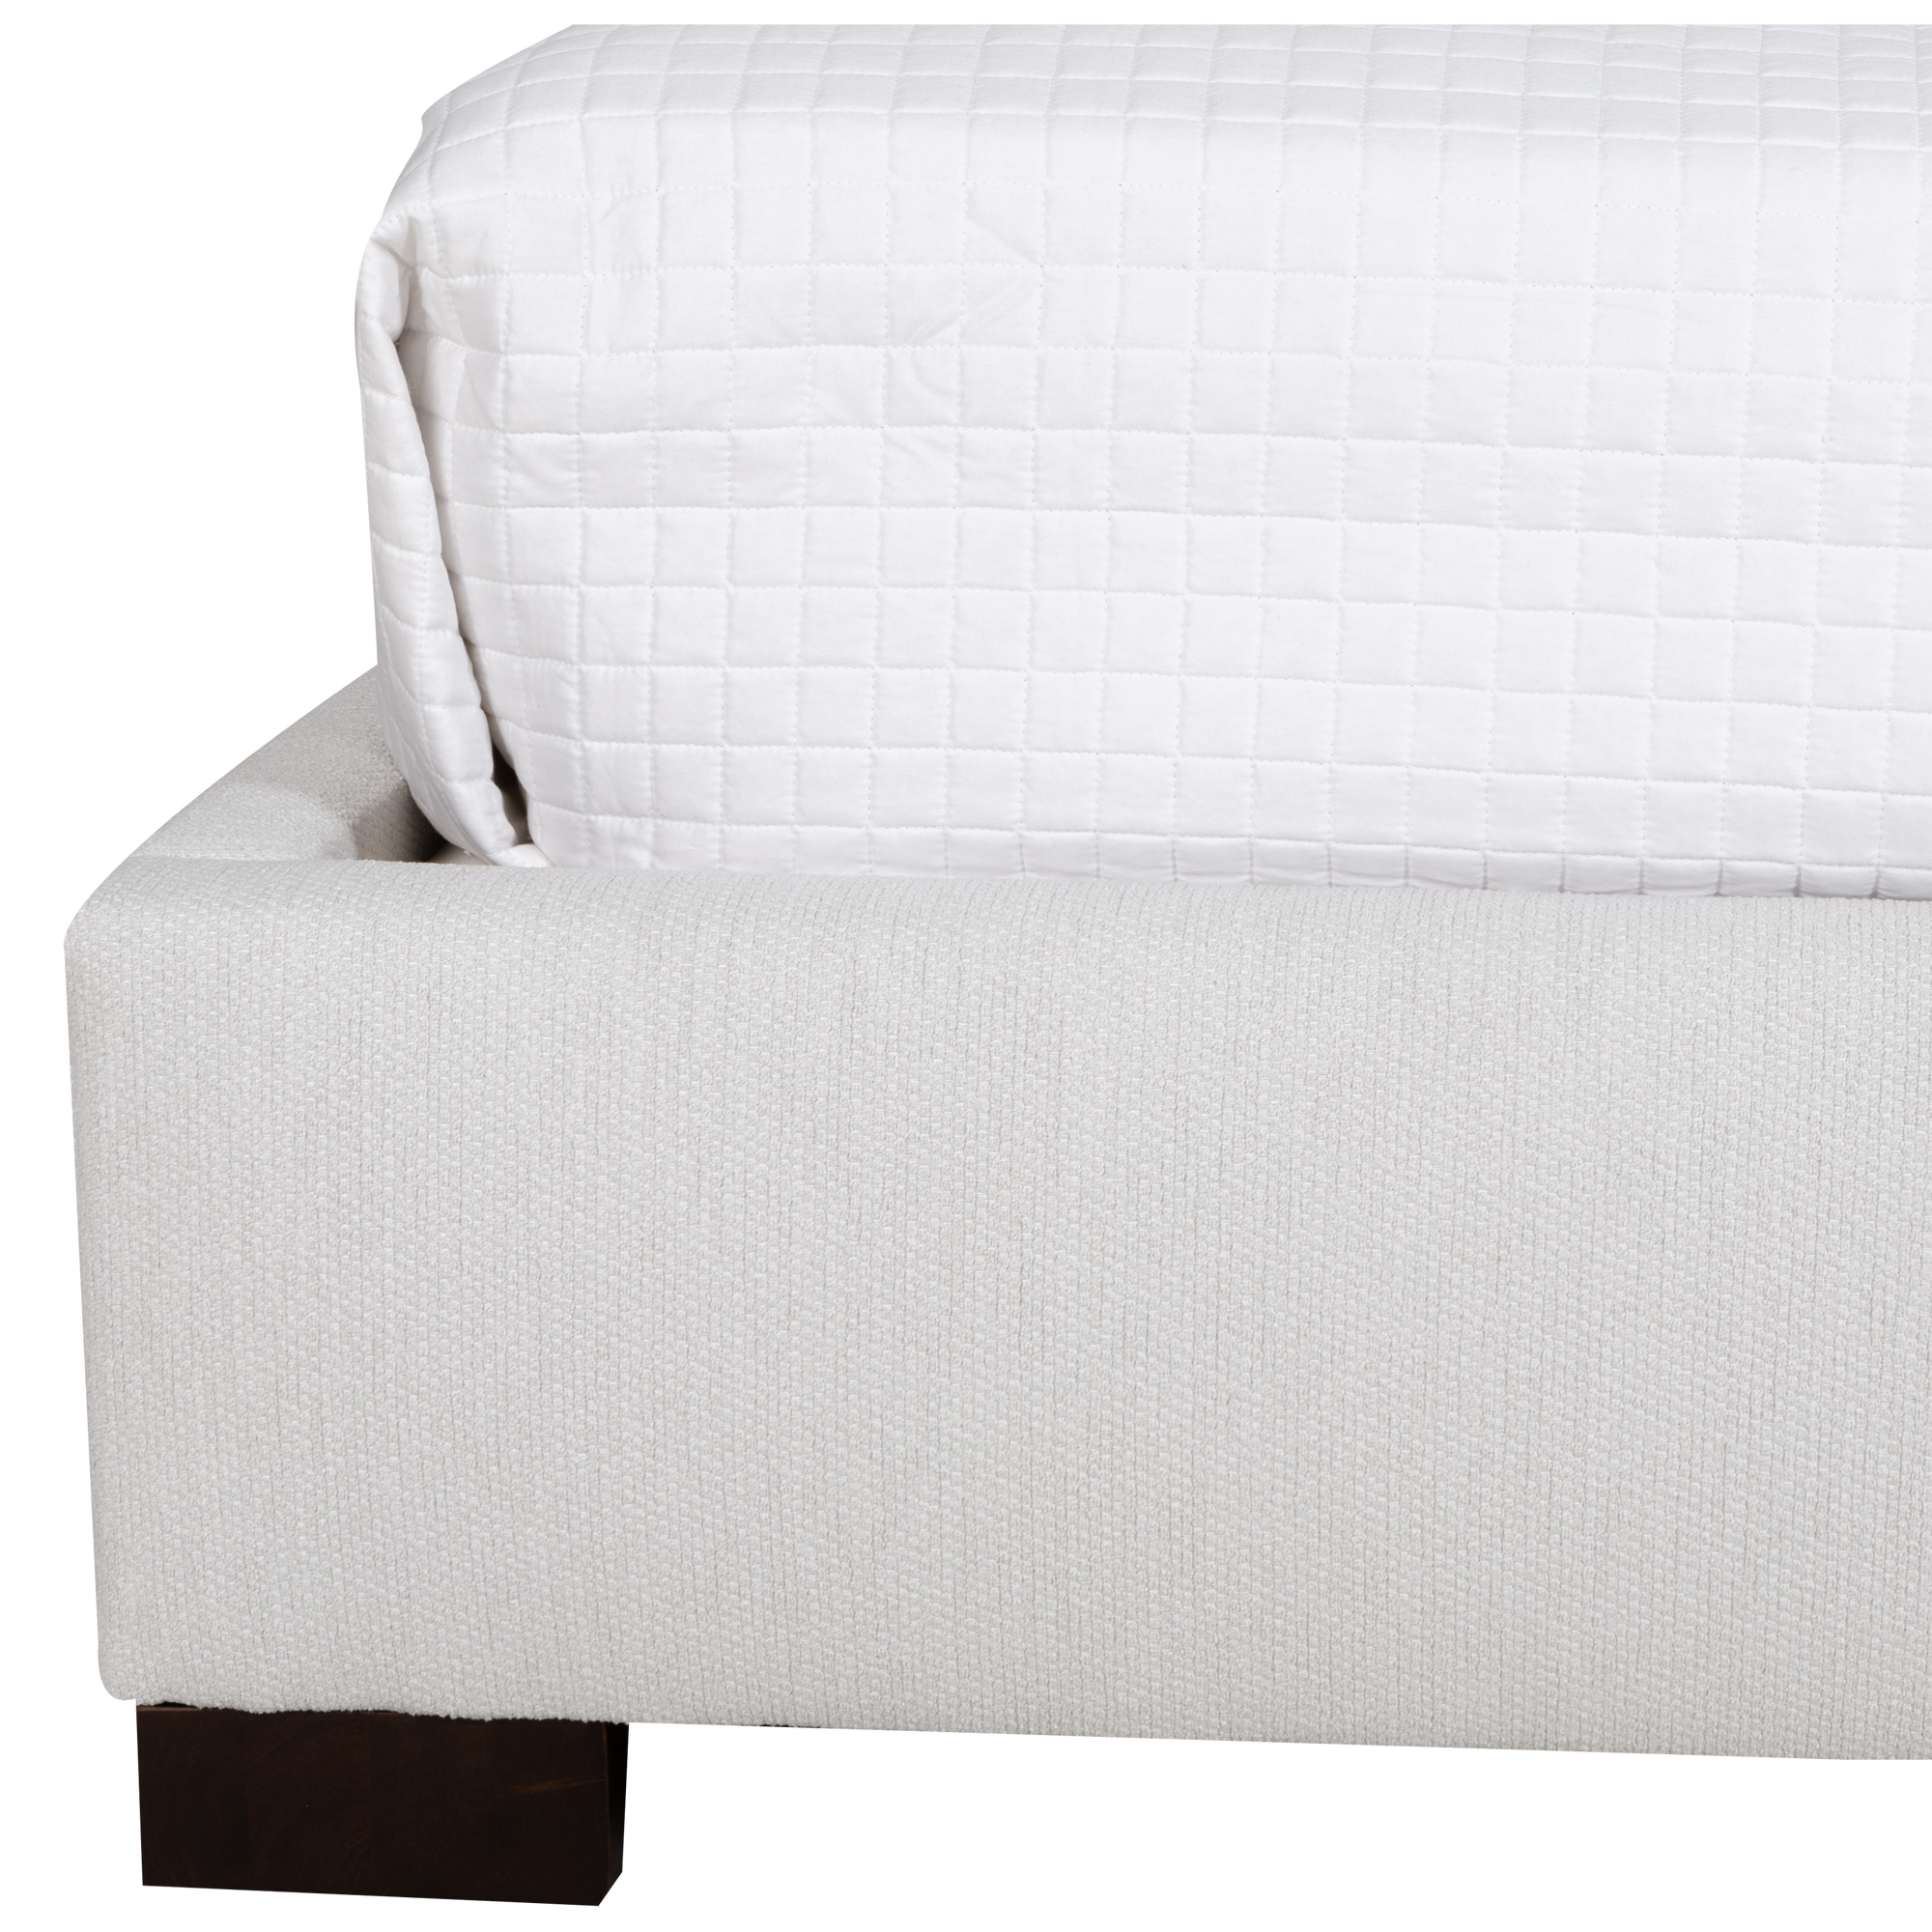 Upholstered in a luxurious light grey fabric, the Raffi Bed makes a bold statement with clean lines and plush styling.